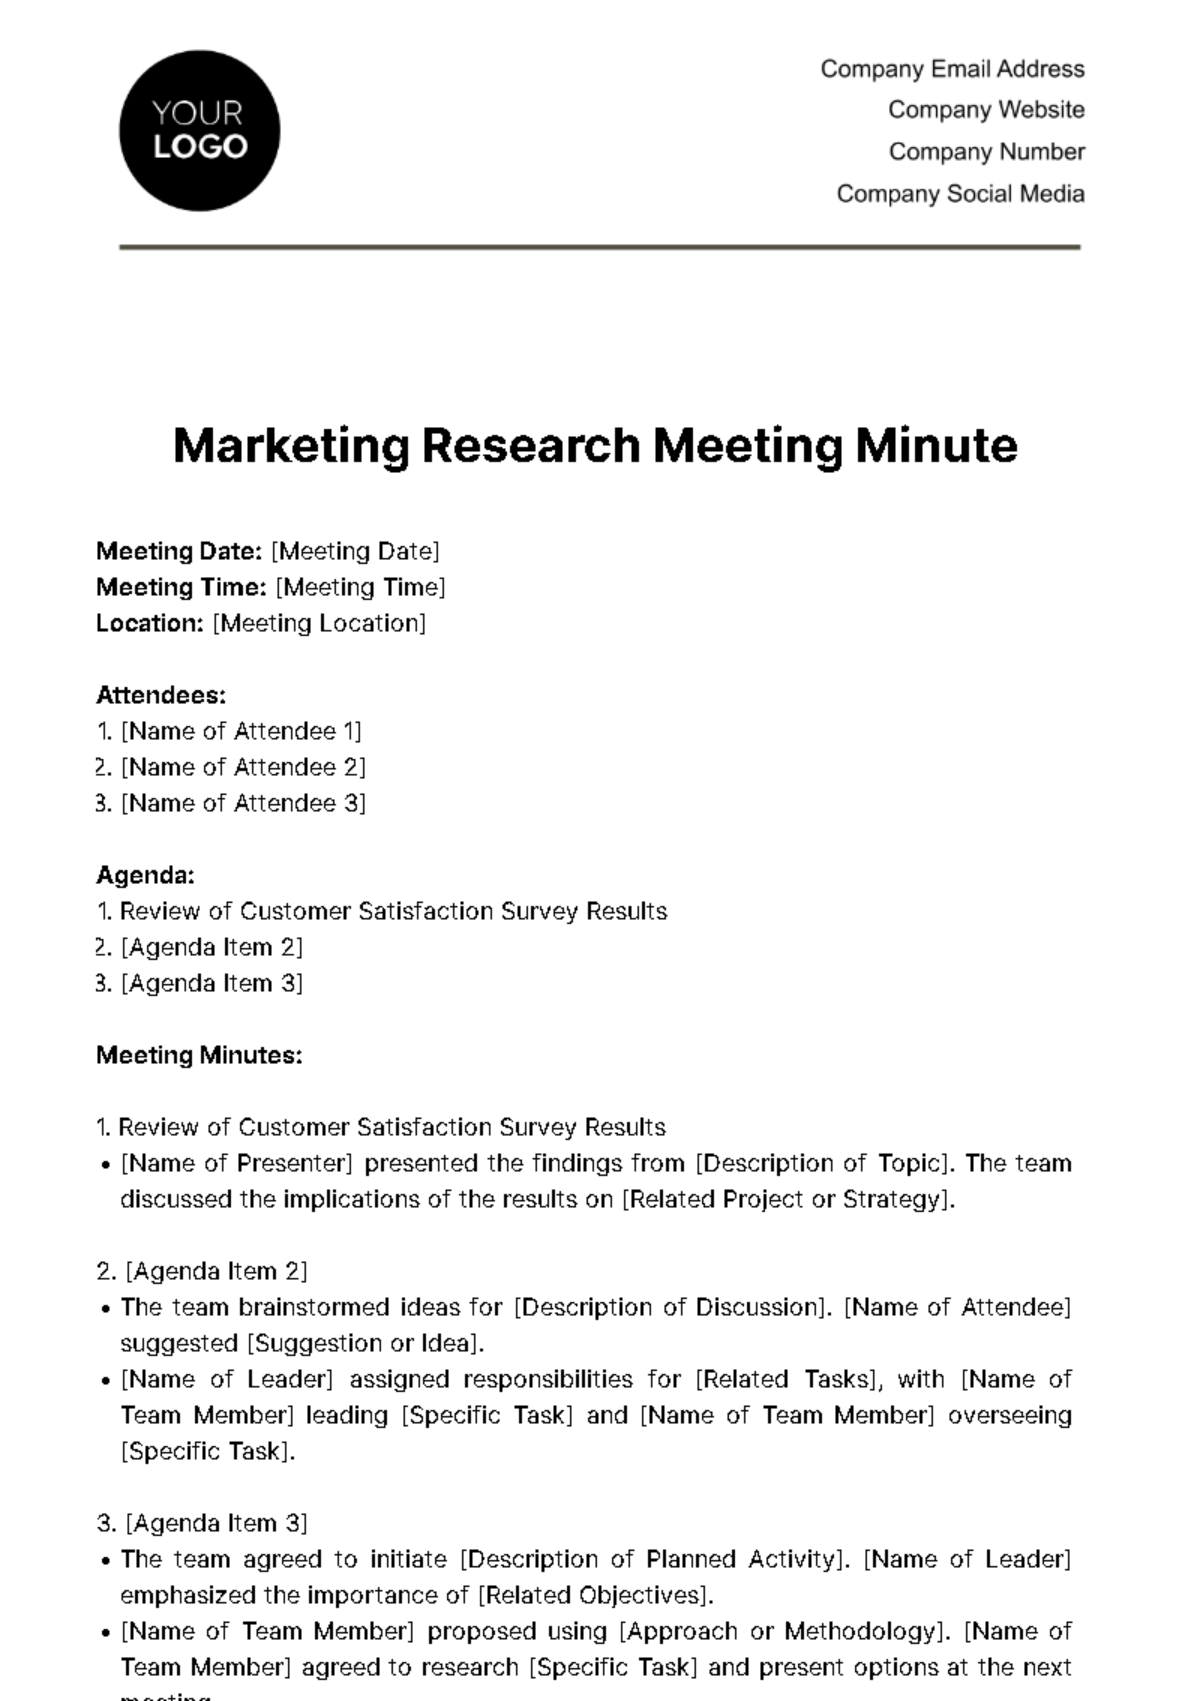 Free Marketing Research Meeting Minute Template